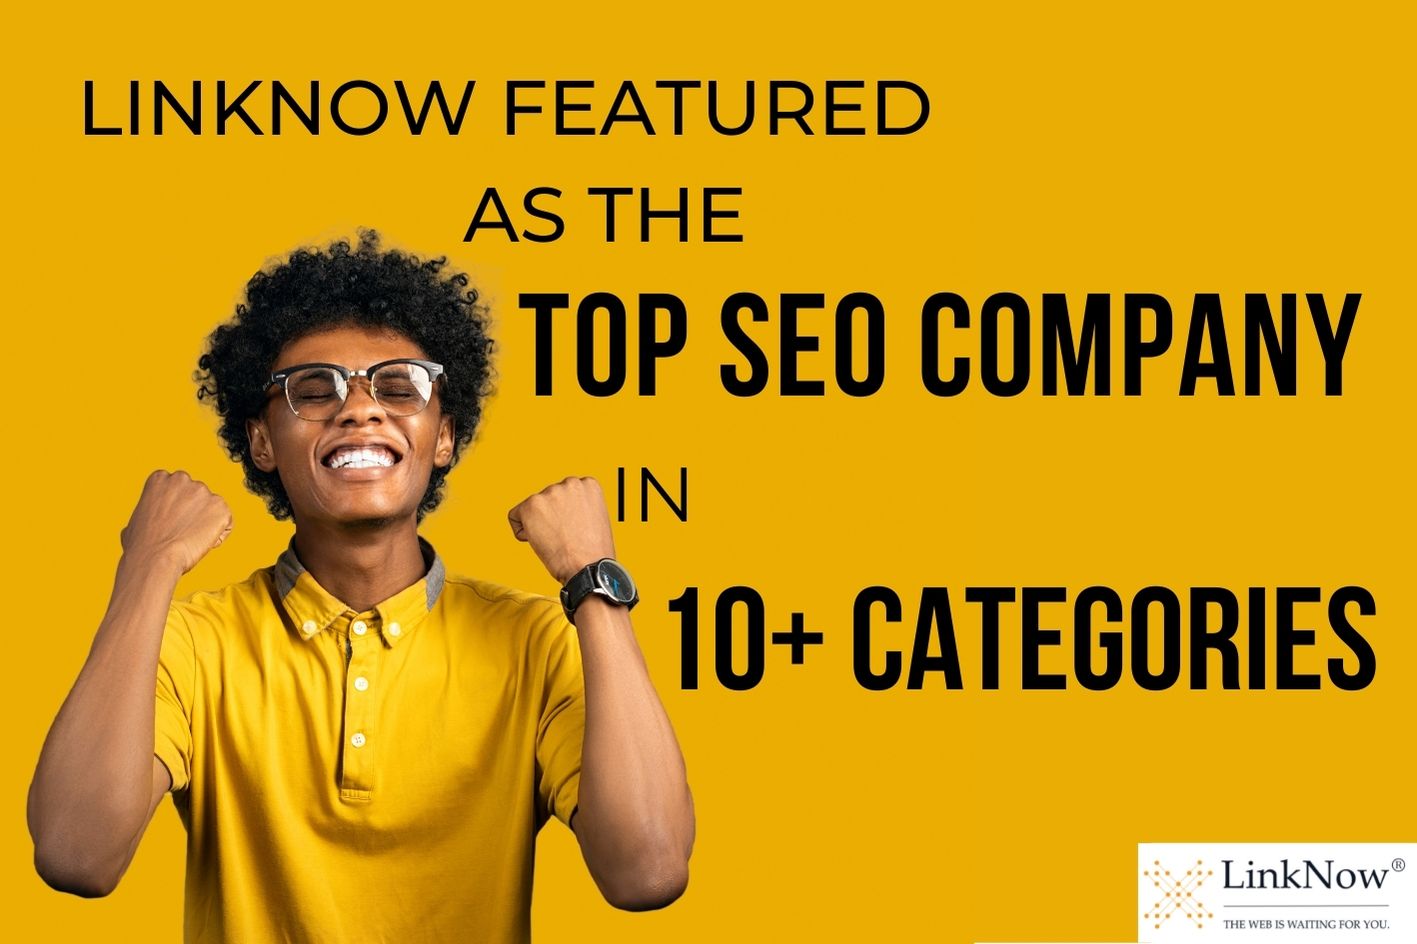 Man raises arms in celebration. Text says: LinkNow featured as the top SEO company in 10+ categories.